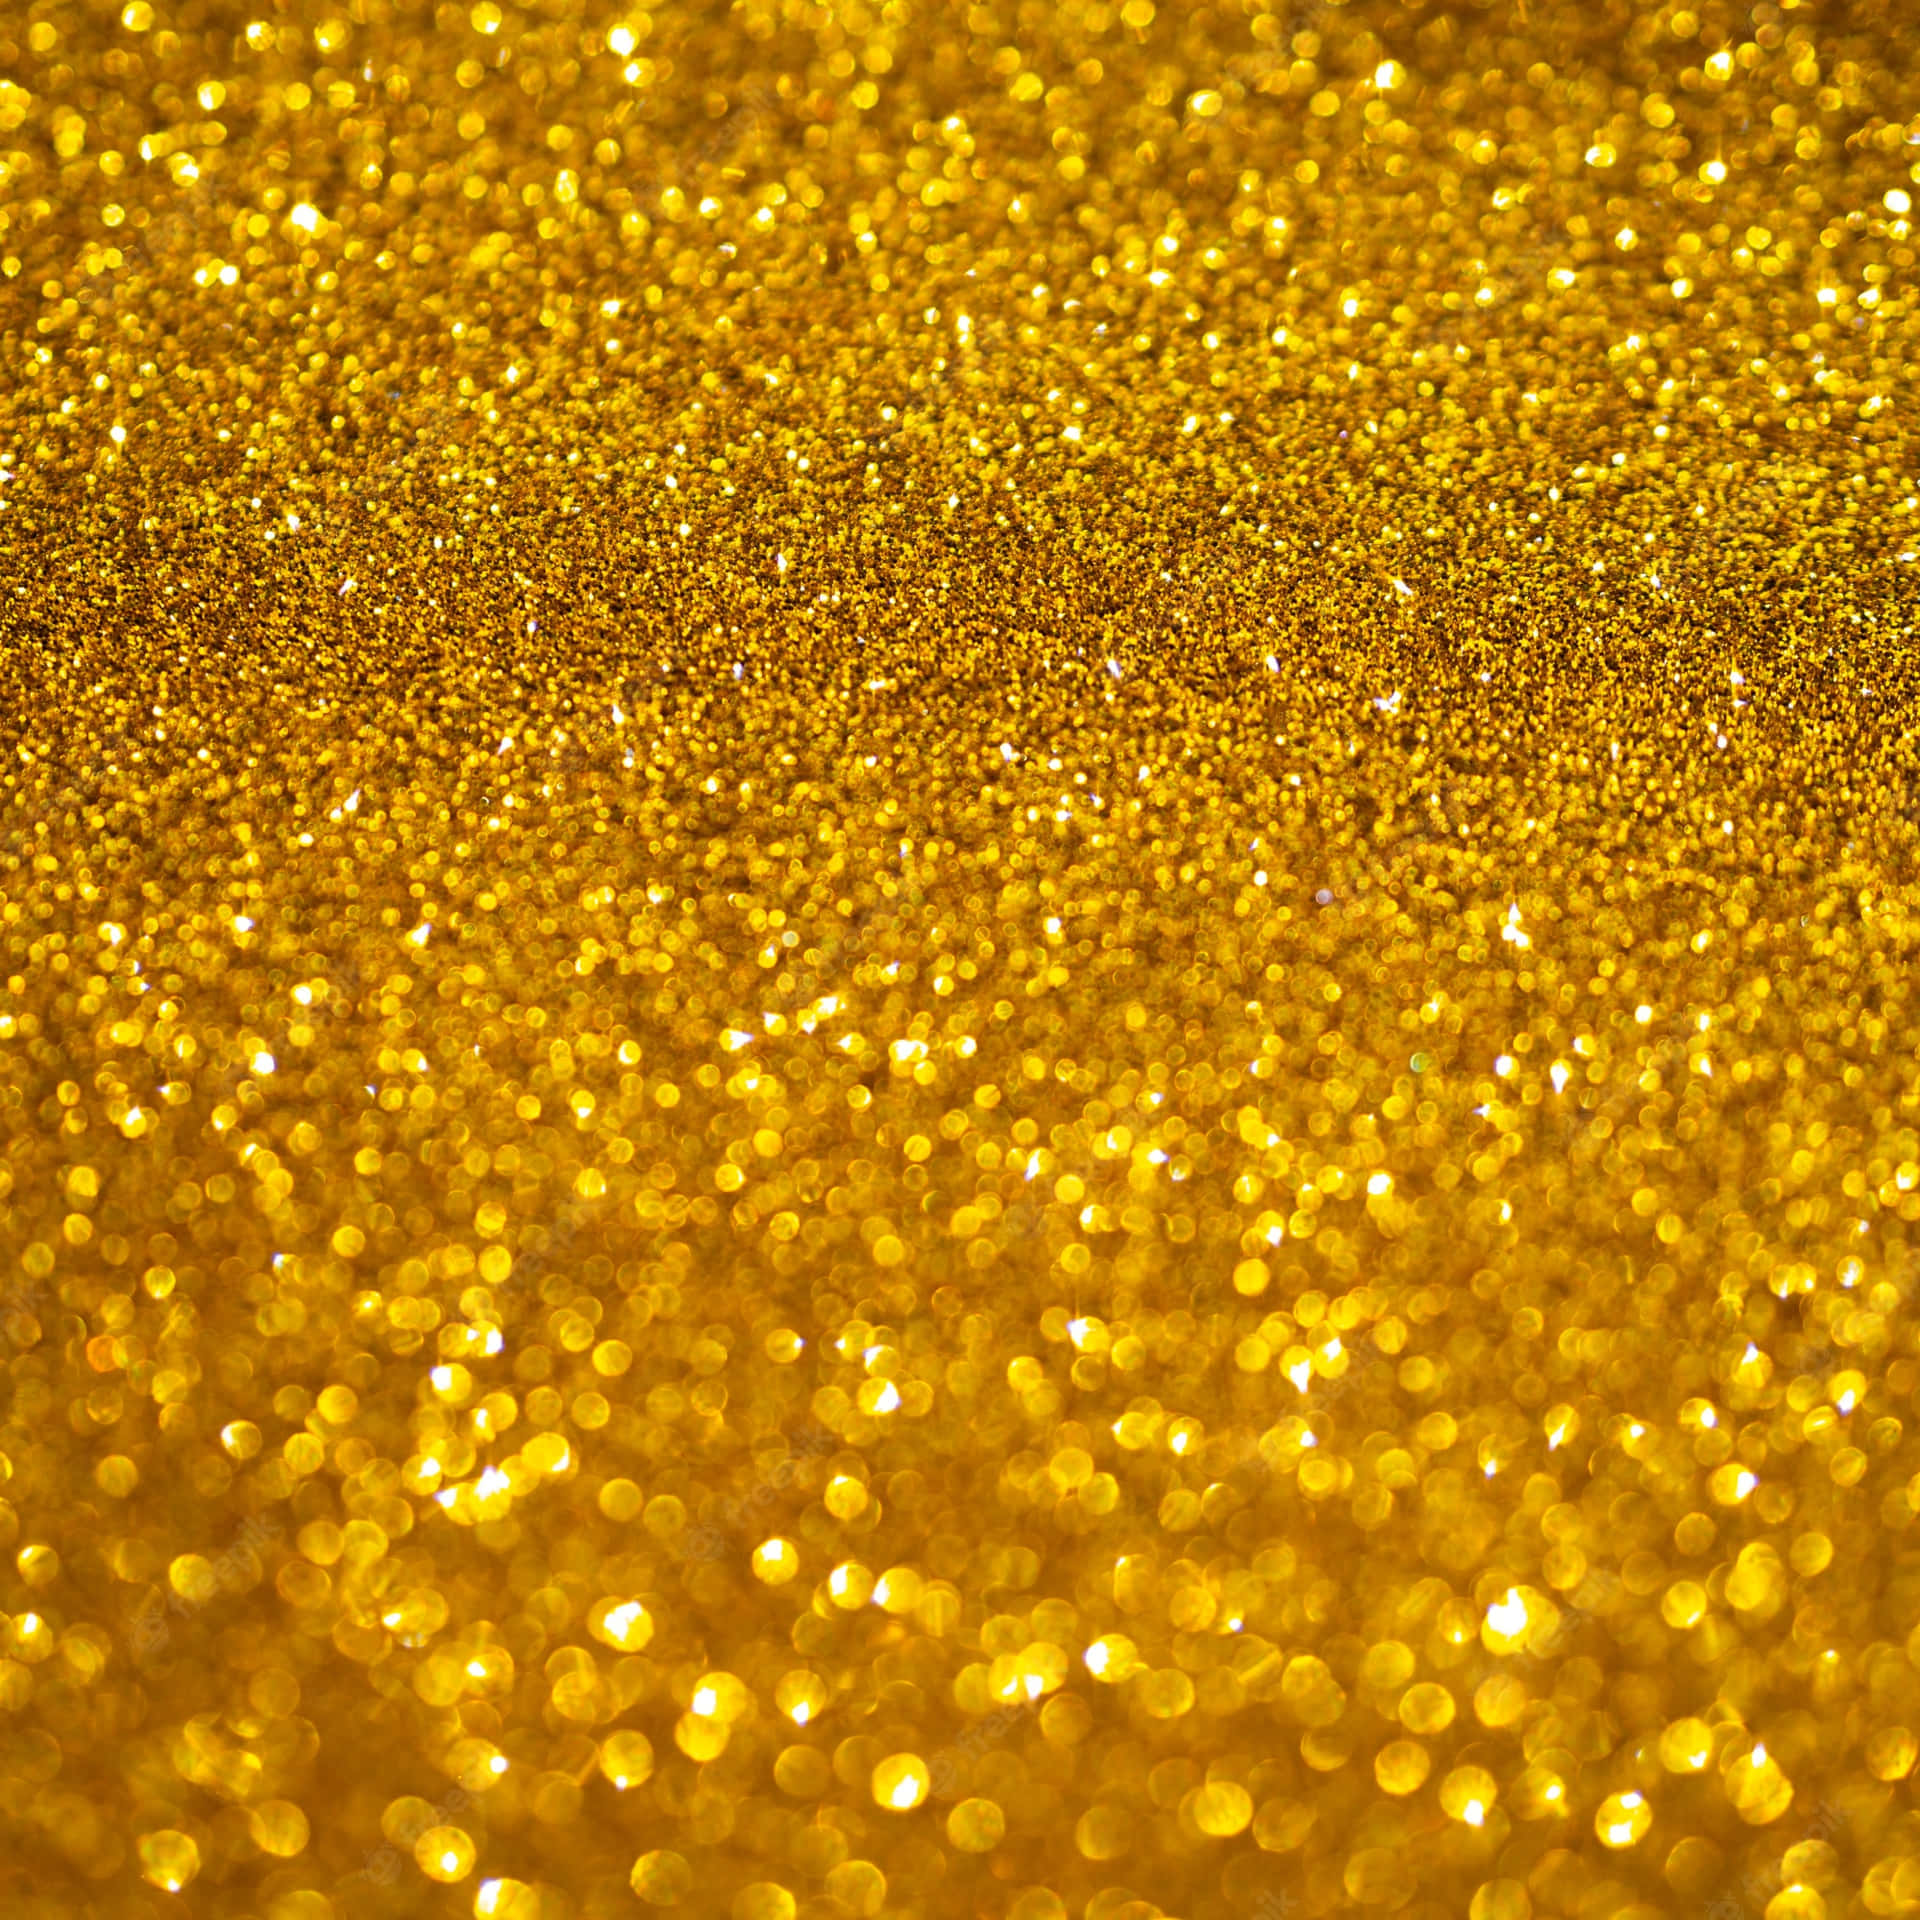 Adding a touch of sparkle to your day with Yellow Glitter Wallpaper